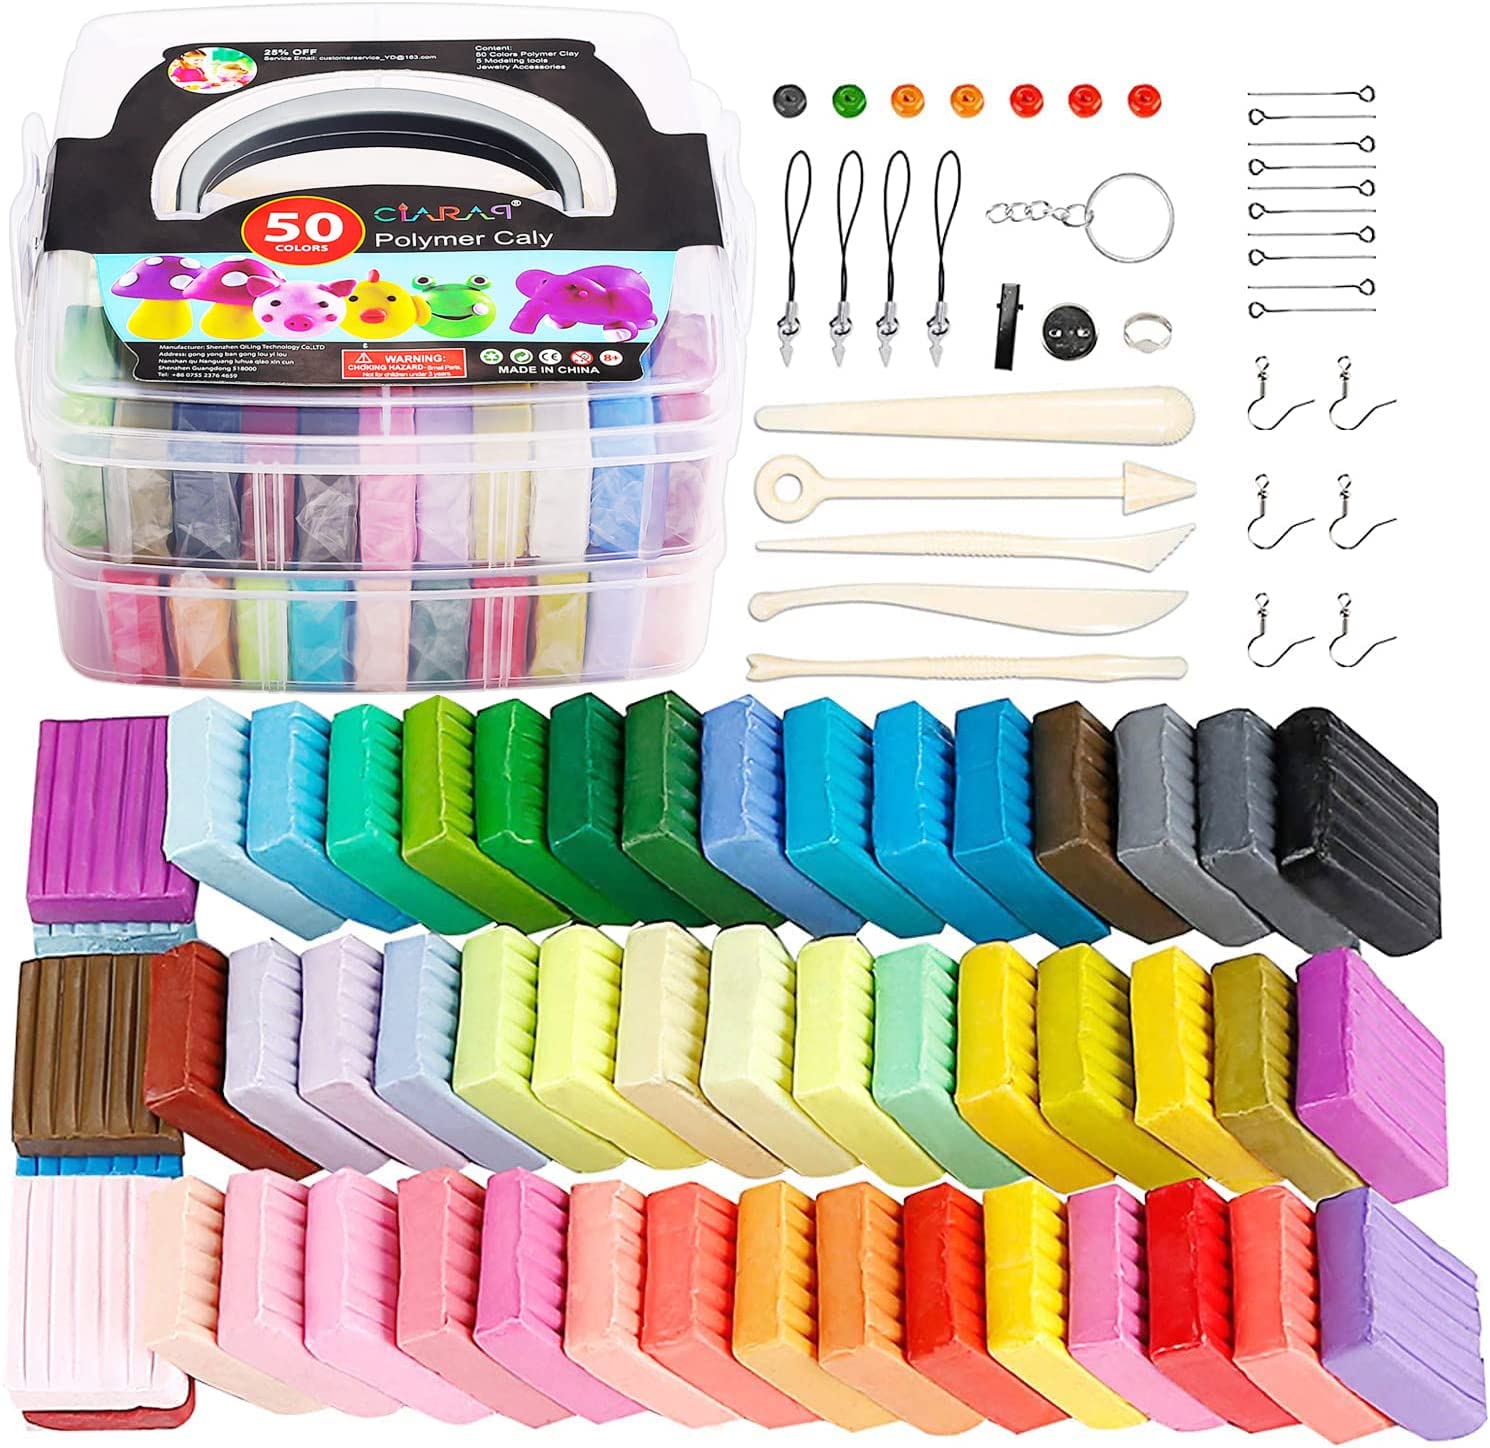 50 Colors Polymer Clay, BYWORLD Modeling Clay Oven Bake Clay With 19  Sculpting Clay Tools and Accessories, Soft Modeling Clay Earring Making -   Denmark